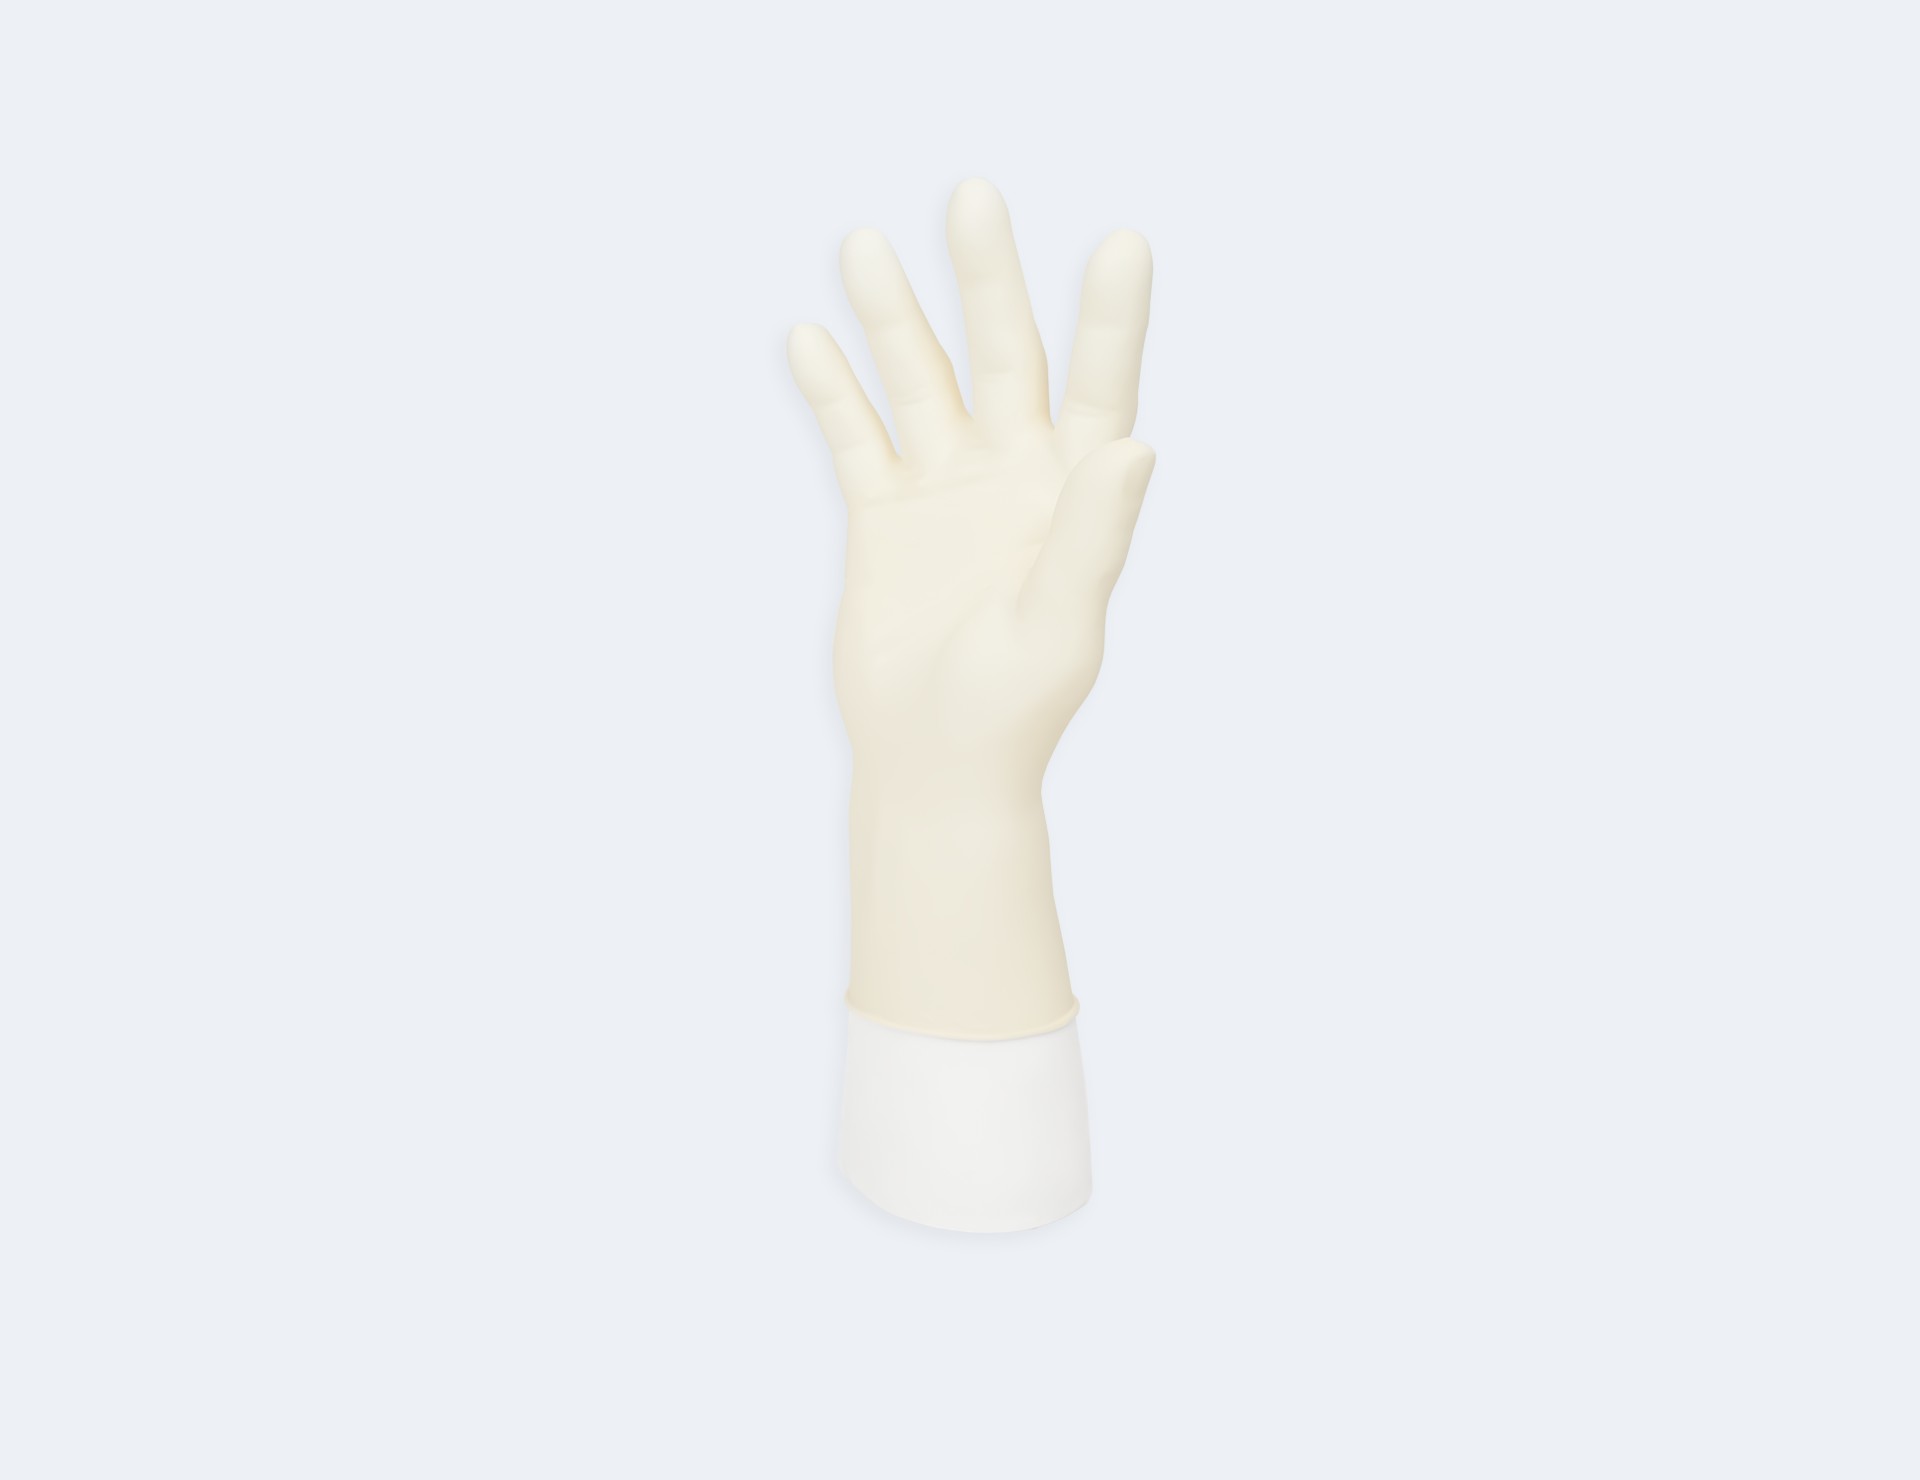 INTCO Medical Disposable Latex Exam Gloves(latex glove)